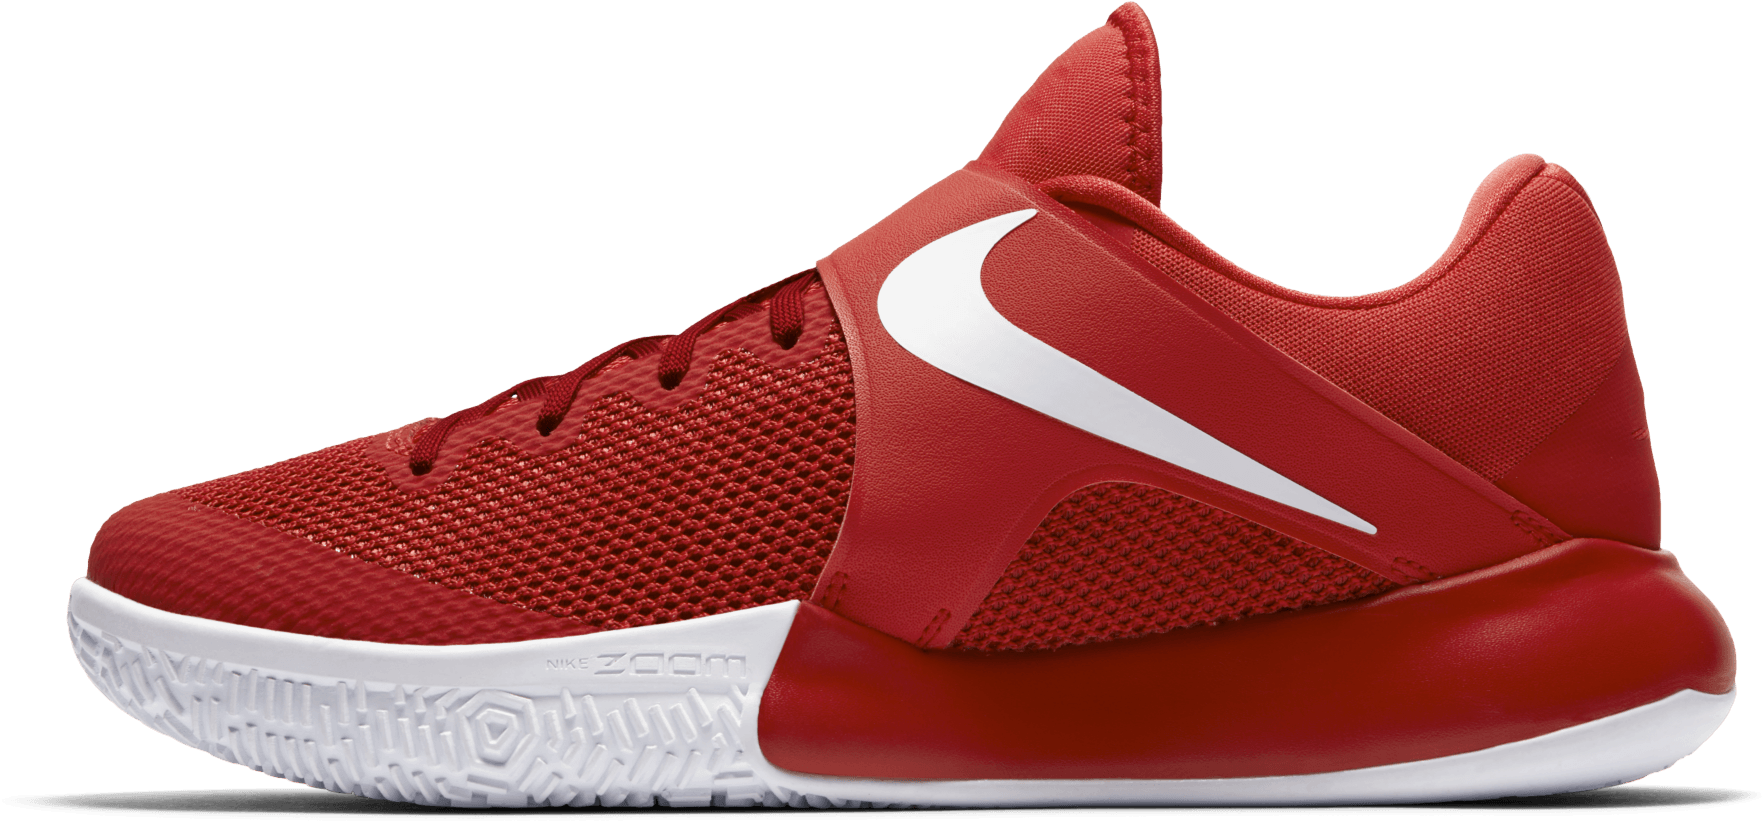 Nike Zoom Live 2017 Performance Review